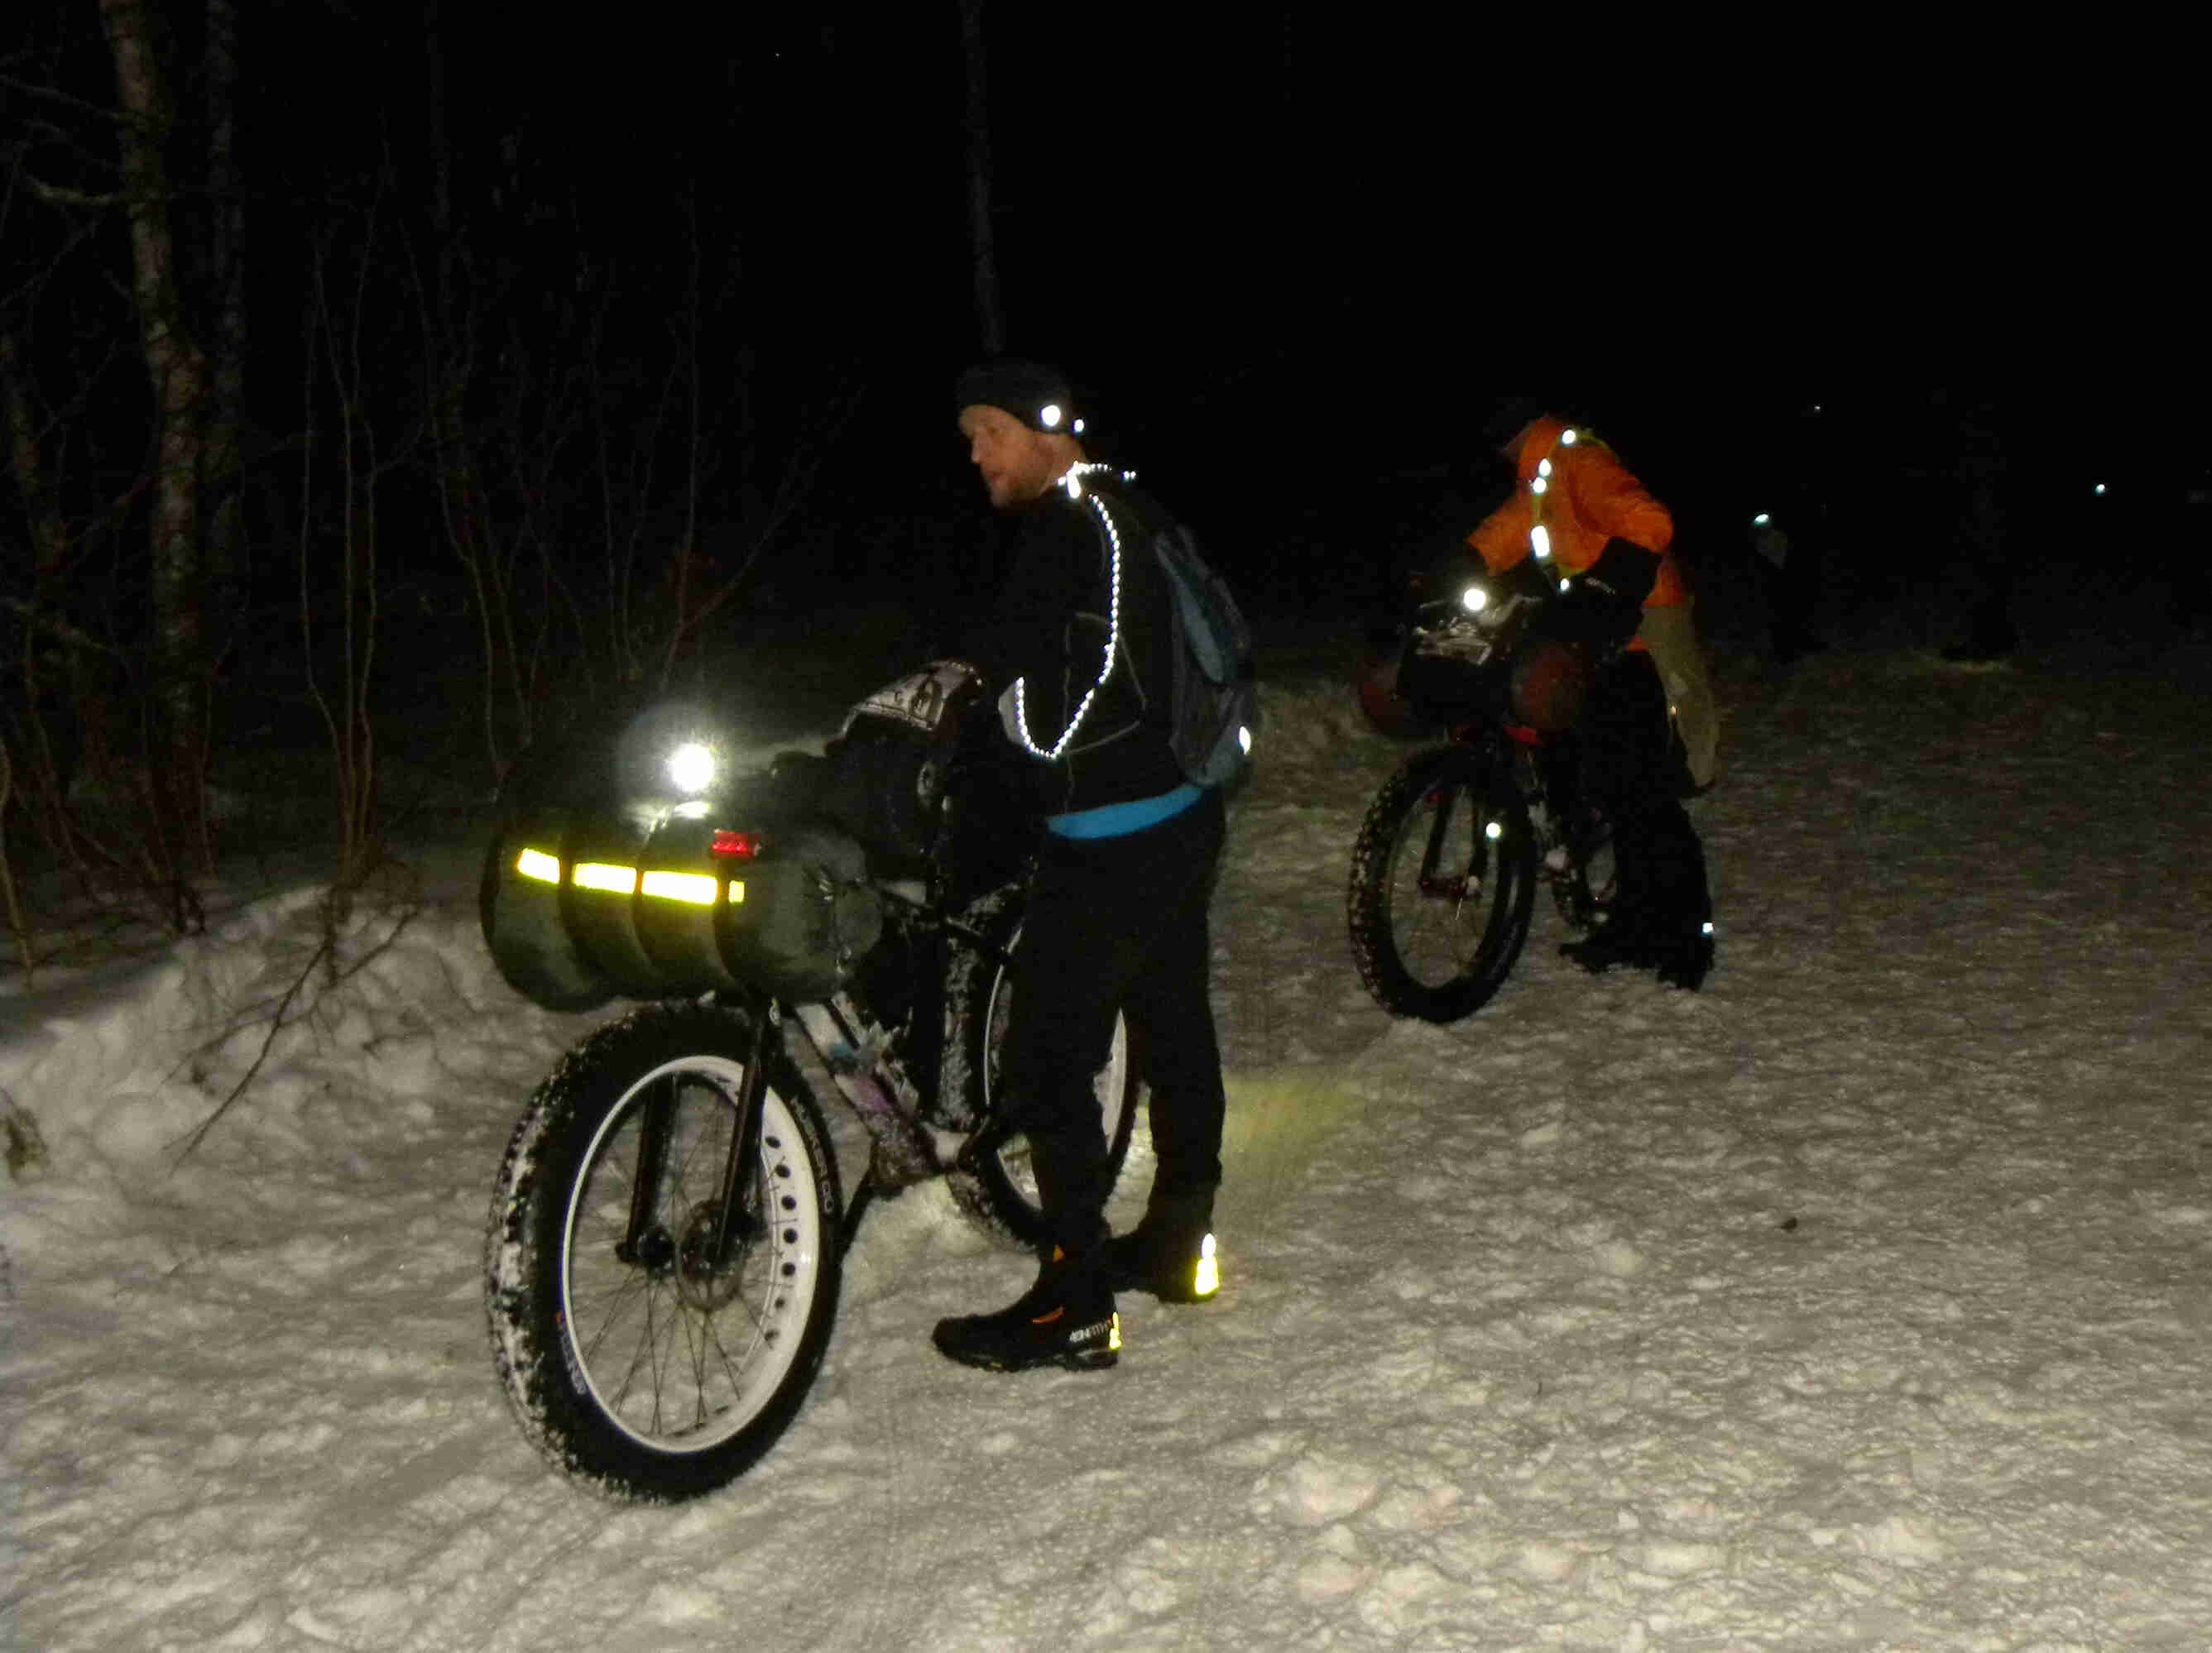 Front, left side view of 2 Surly fat bikes with cyclists standing on the left side, on a snowy trail at night